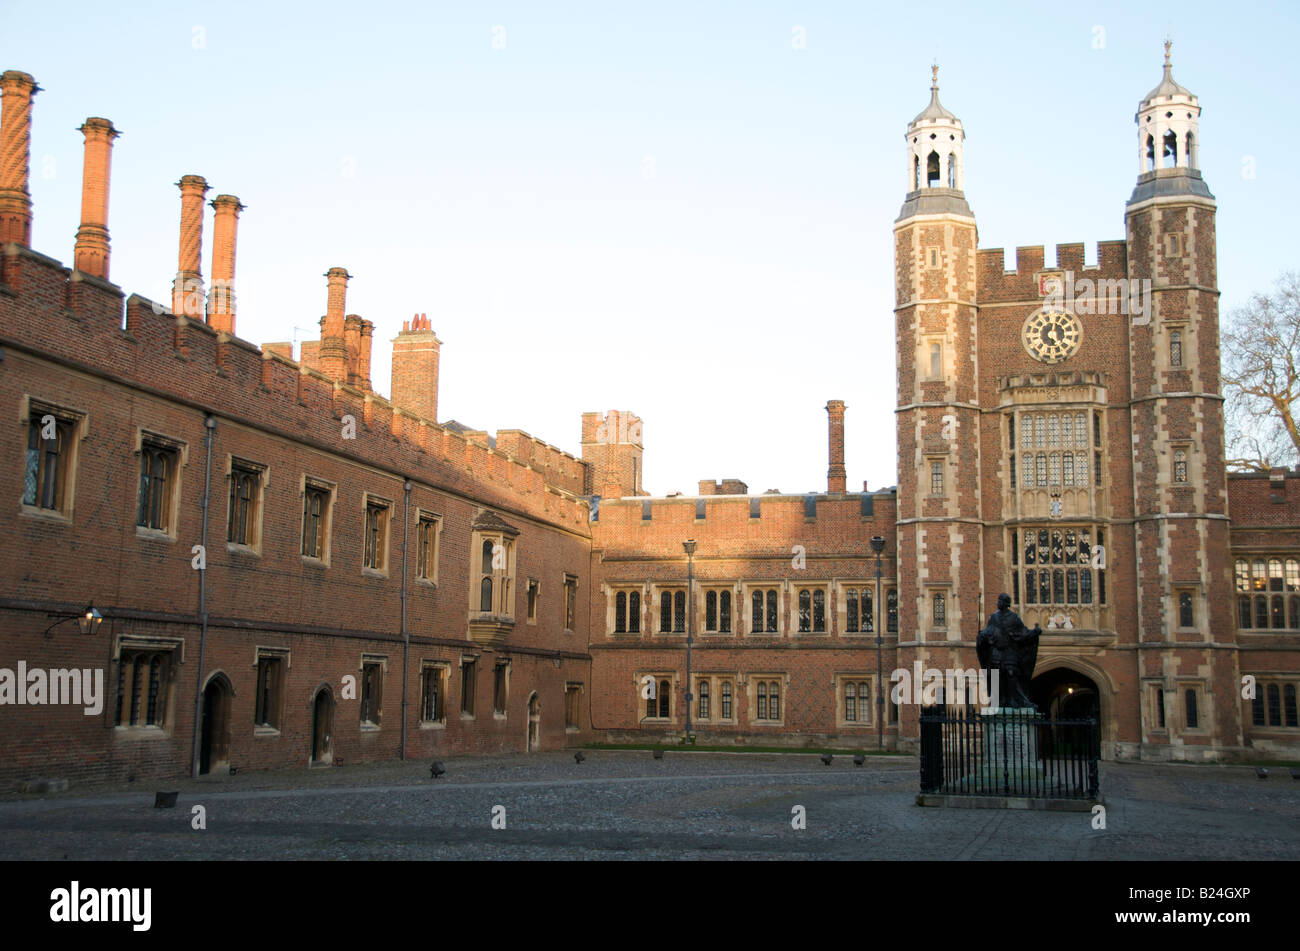 Eton College main courtyard, in the early evening. The statue is of Henry VI, who founded the school with its 70 scholars. Stock Photo